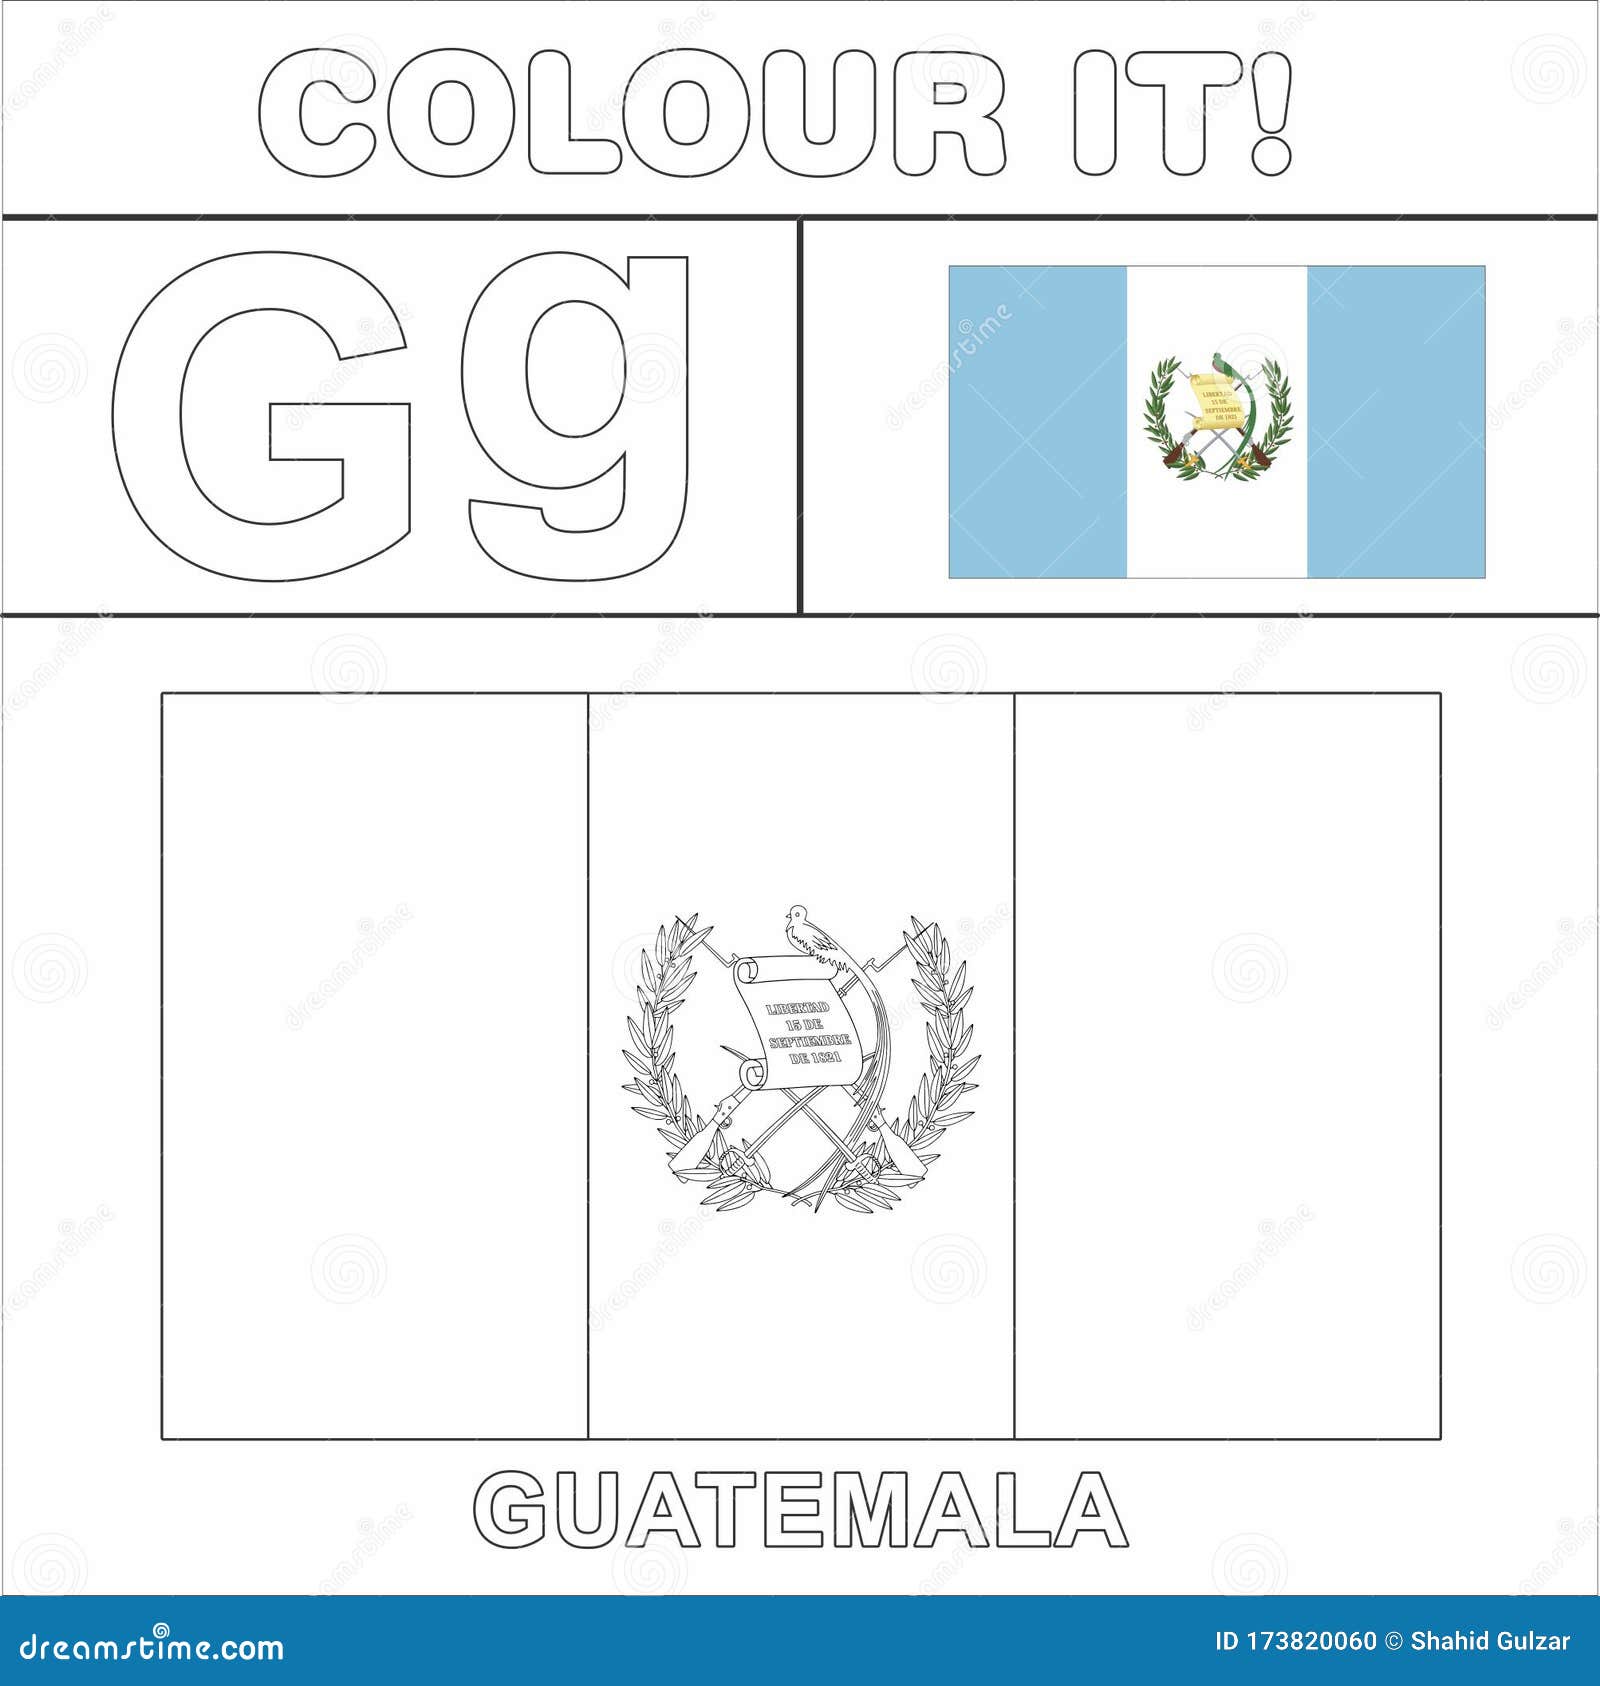 Colour it kids colouring page country starting from english letter g guatemala how to color flag stock illustration